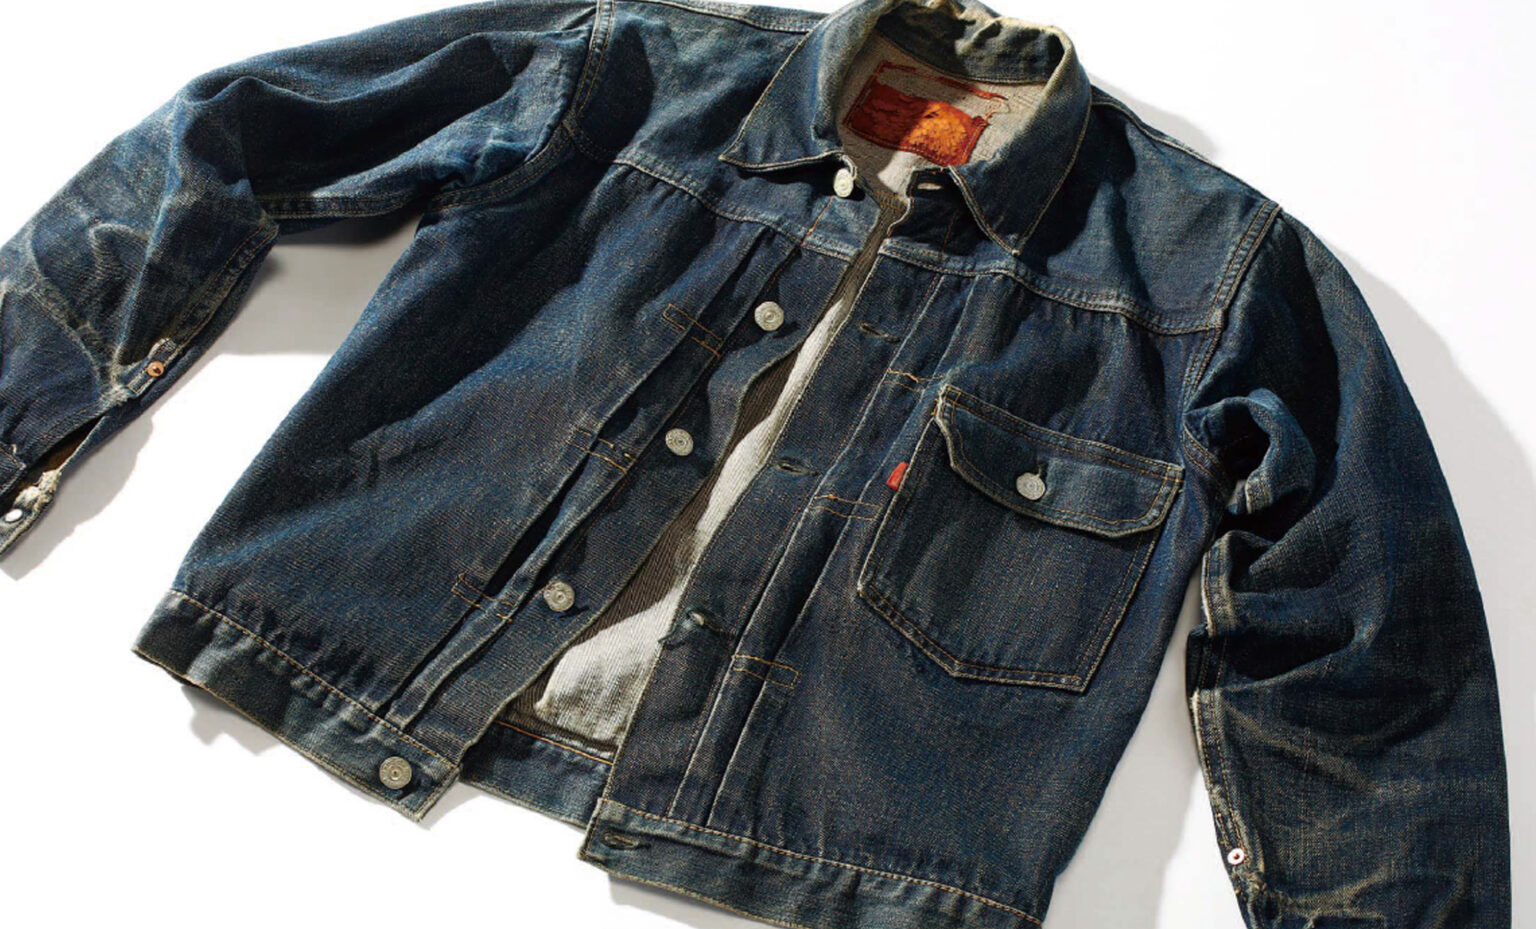 Levi’s® Vintage Denim Jackets Detailed in New Book - Levi Strauss & Co